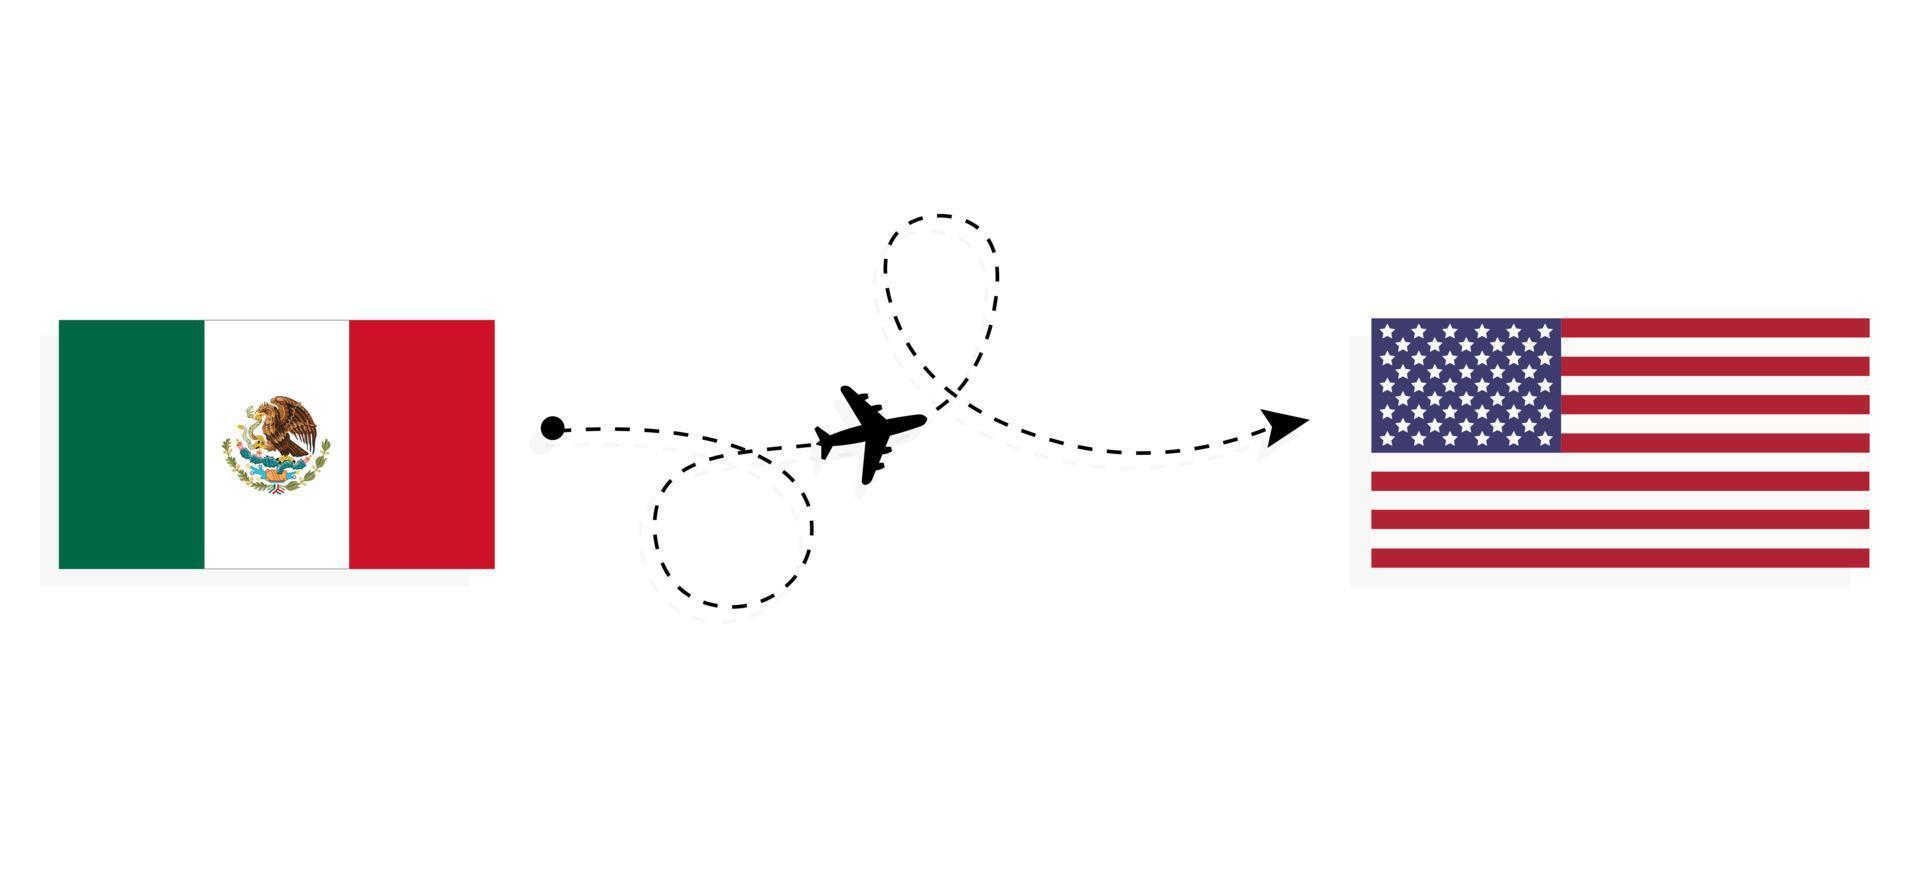 Flight and travel from Australia to USA by passenger airplane Travel concept vector